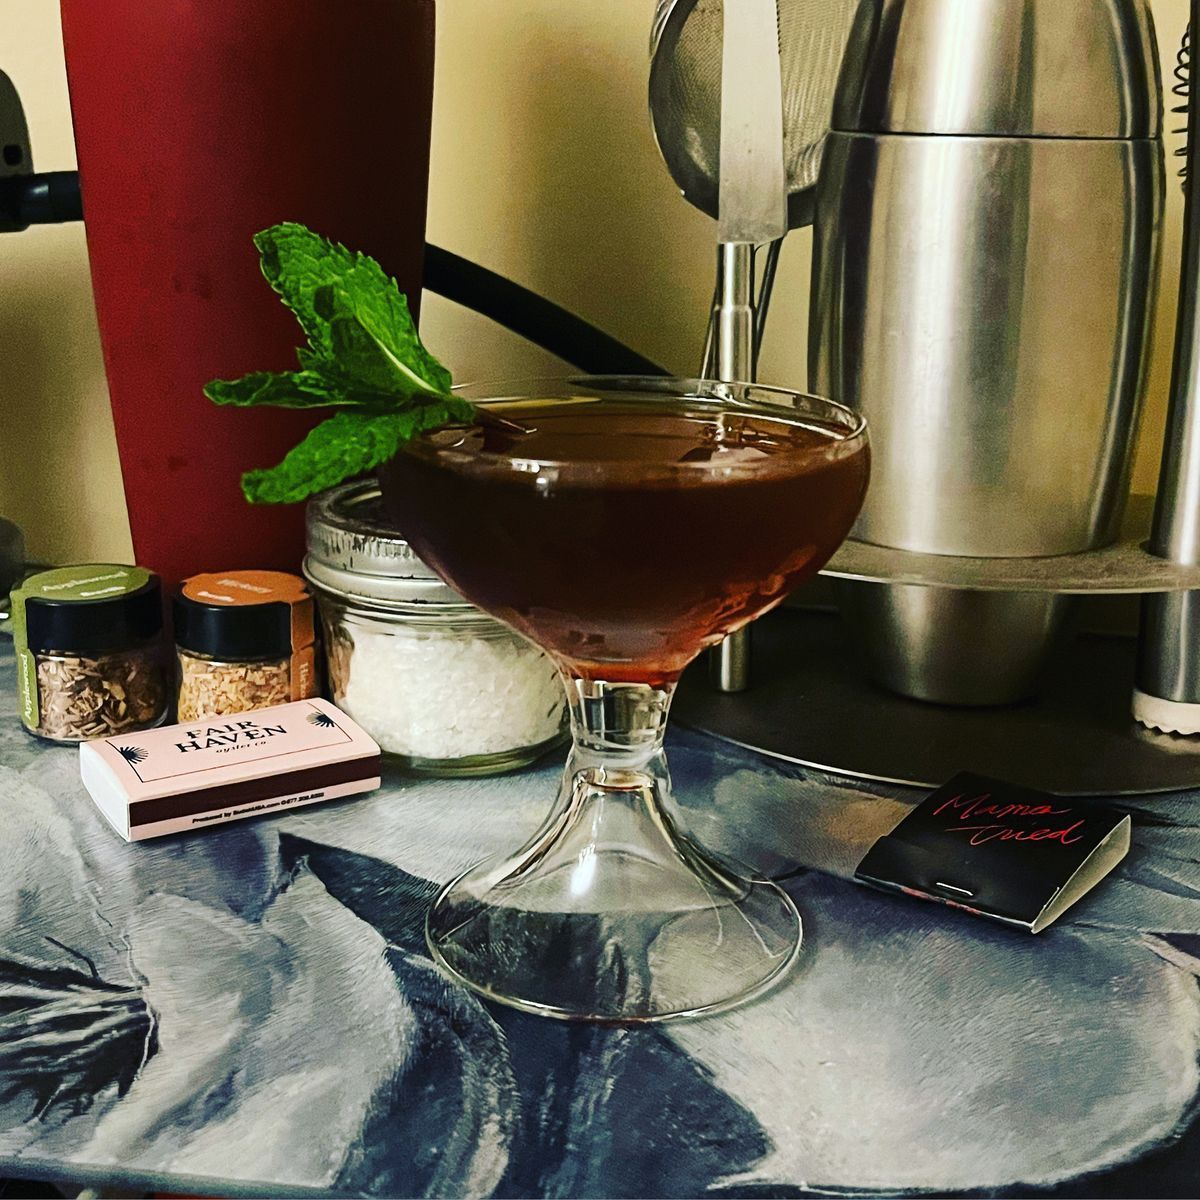 Sometimes all you can do after a trying weekend is mix yourself something strong. The original Toronto fits that bill for me tonight. But I also wanted to soften the fernet punch a tad, adding a earl grey syrup in place of the usual simple and adding a mint spring instead of a lemon peel to play nice with fernet’s minty kick.